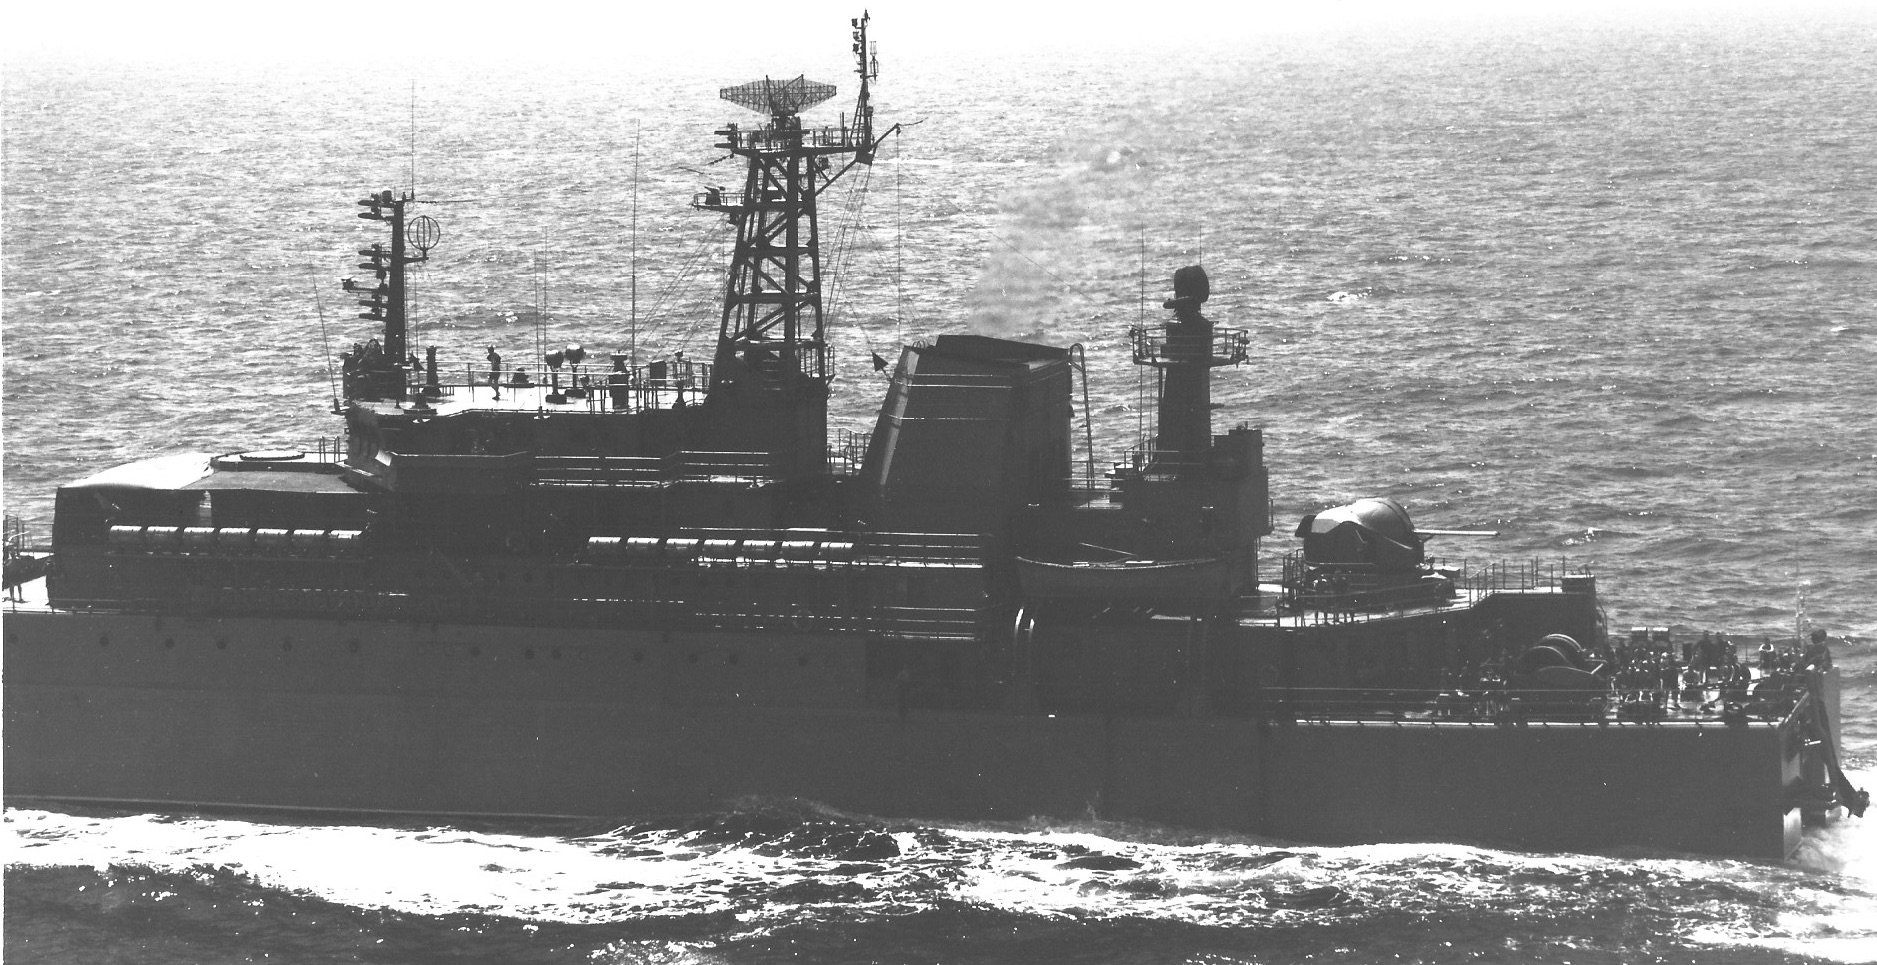 BDK-14 amidship-stern -091 (Project 775 - Ropucha-I) : 29Jul1982 : Pacific :G. Jacobs Collection.jpg